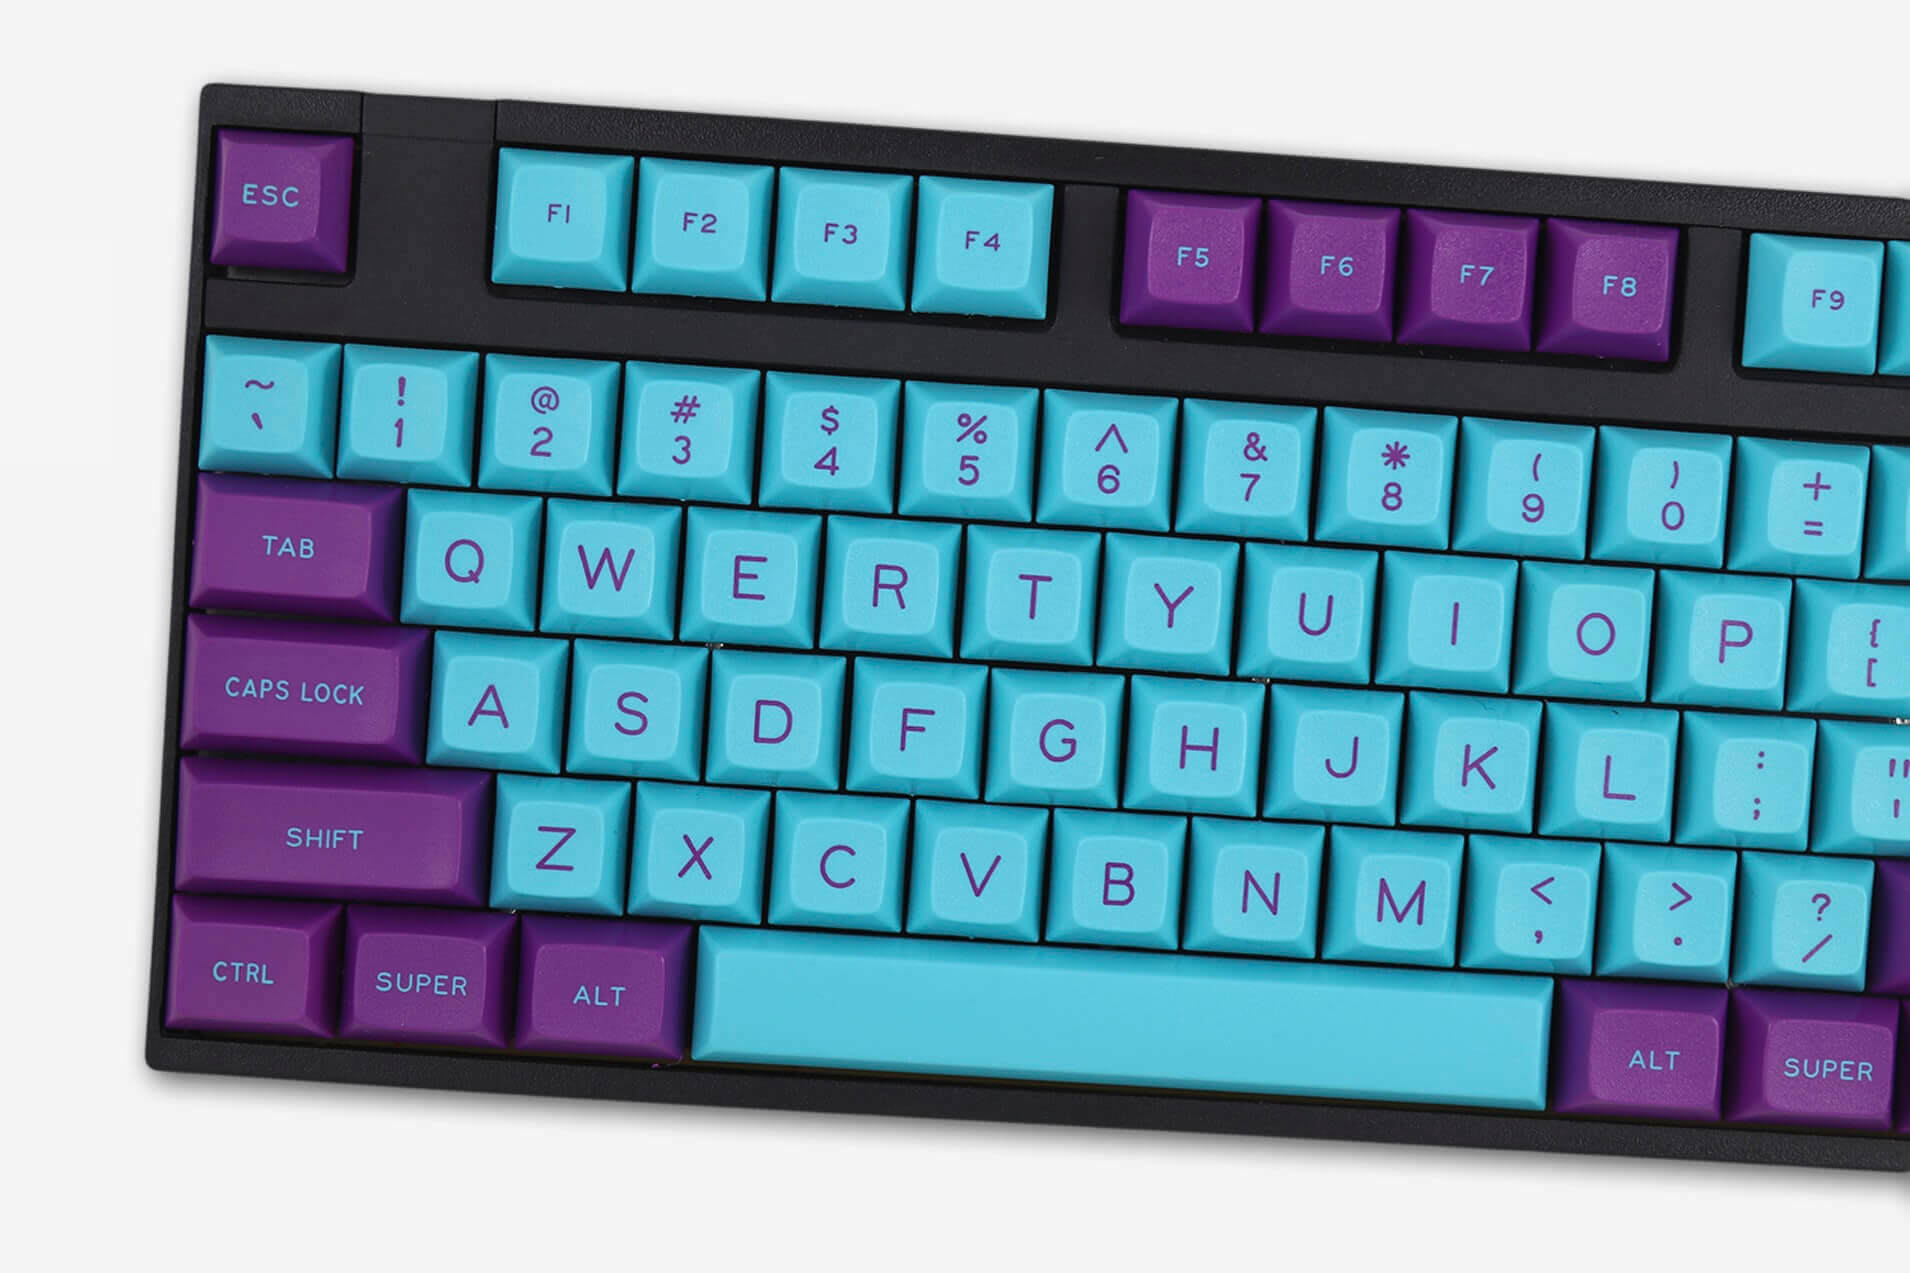 Build Your Own Mechanical Keyboard Project: What you need to get started